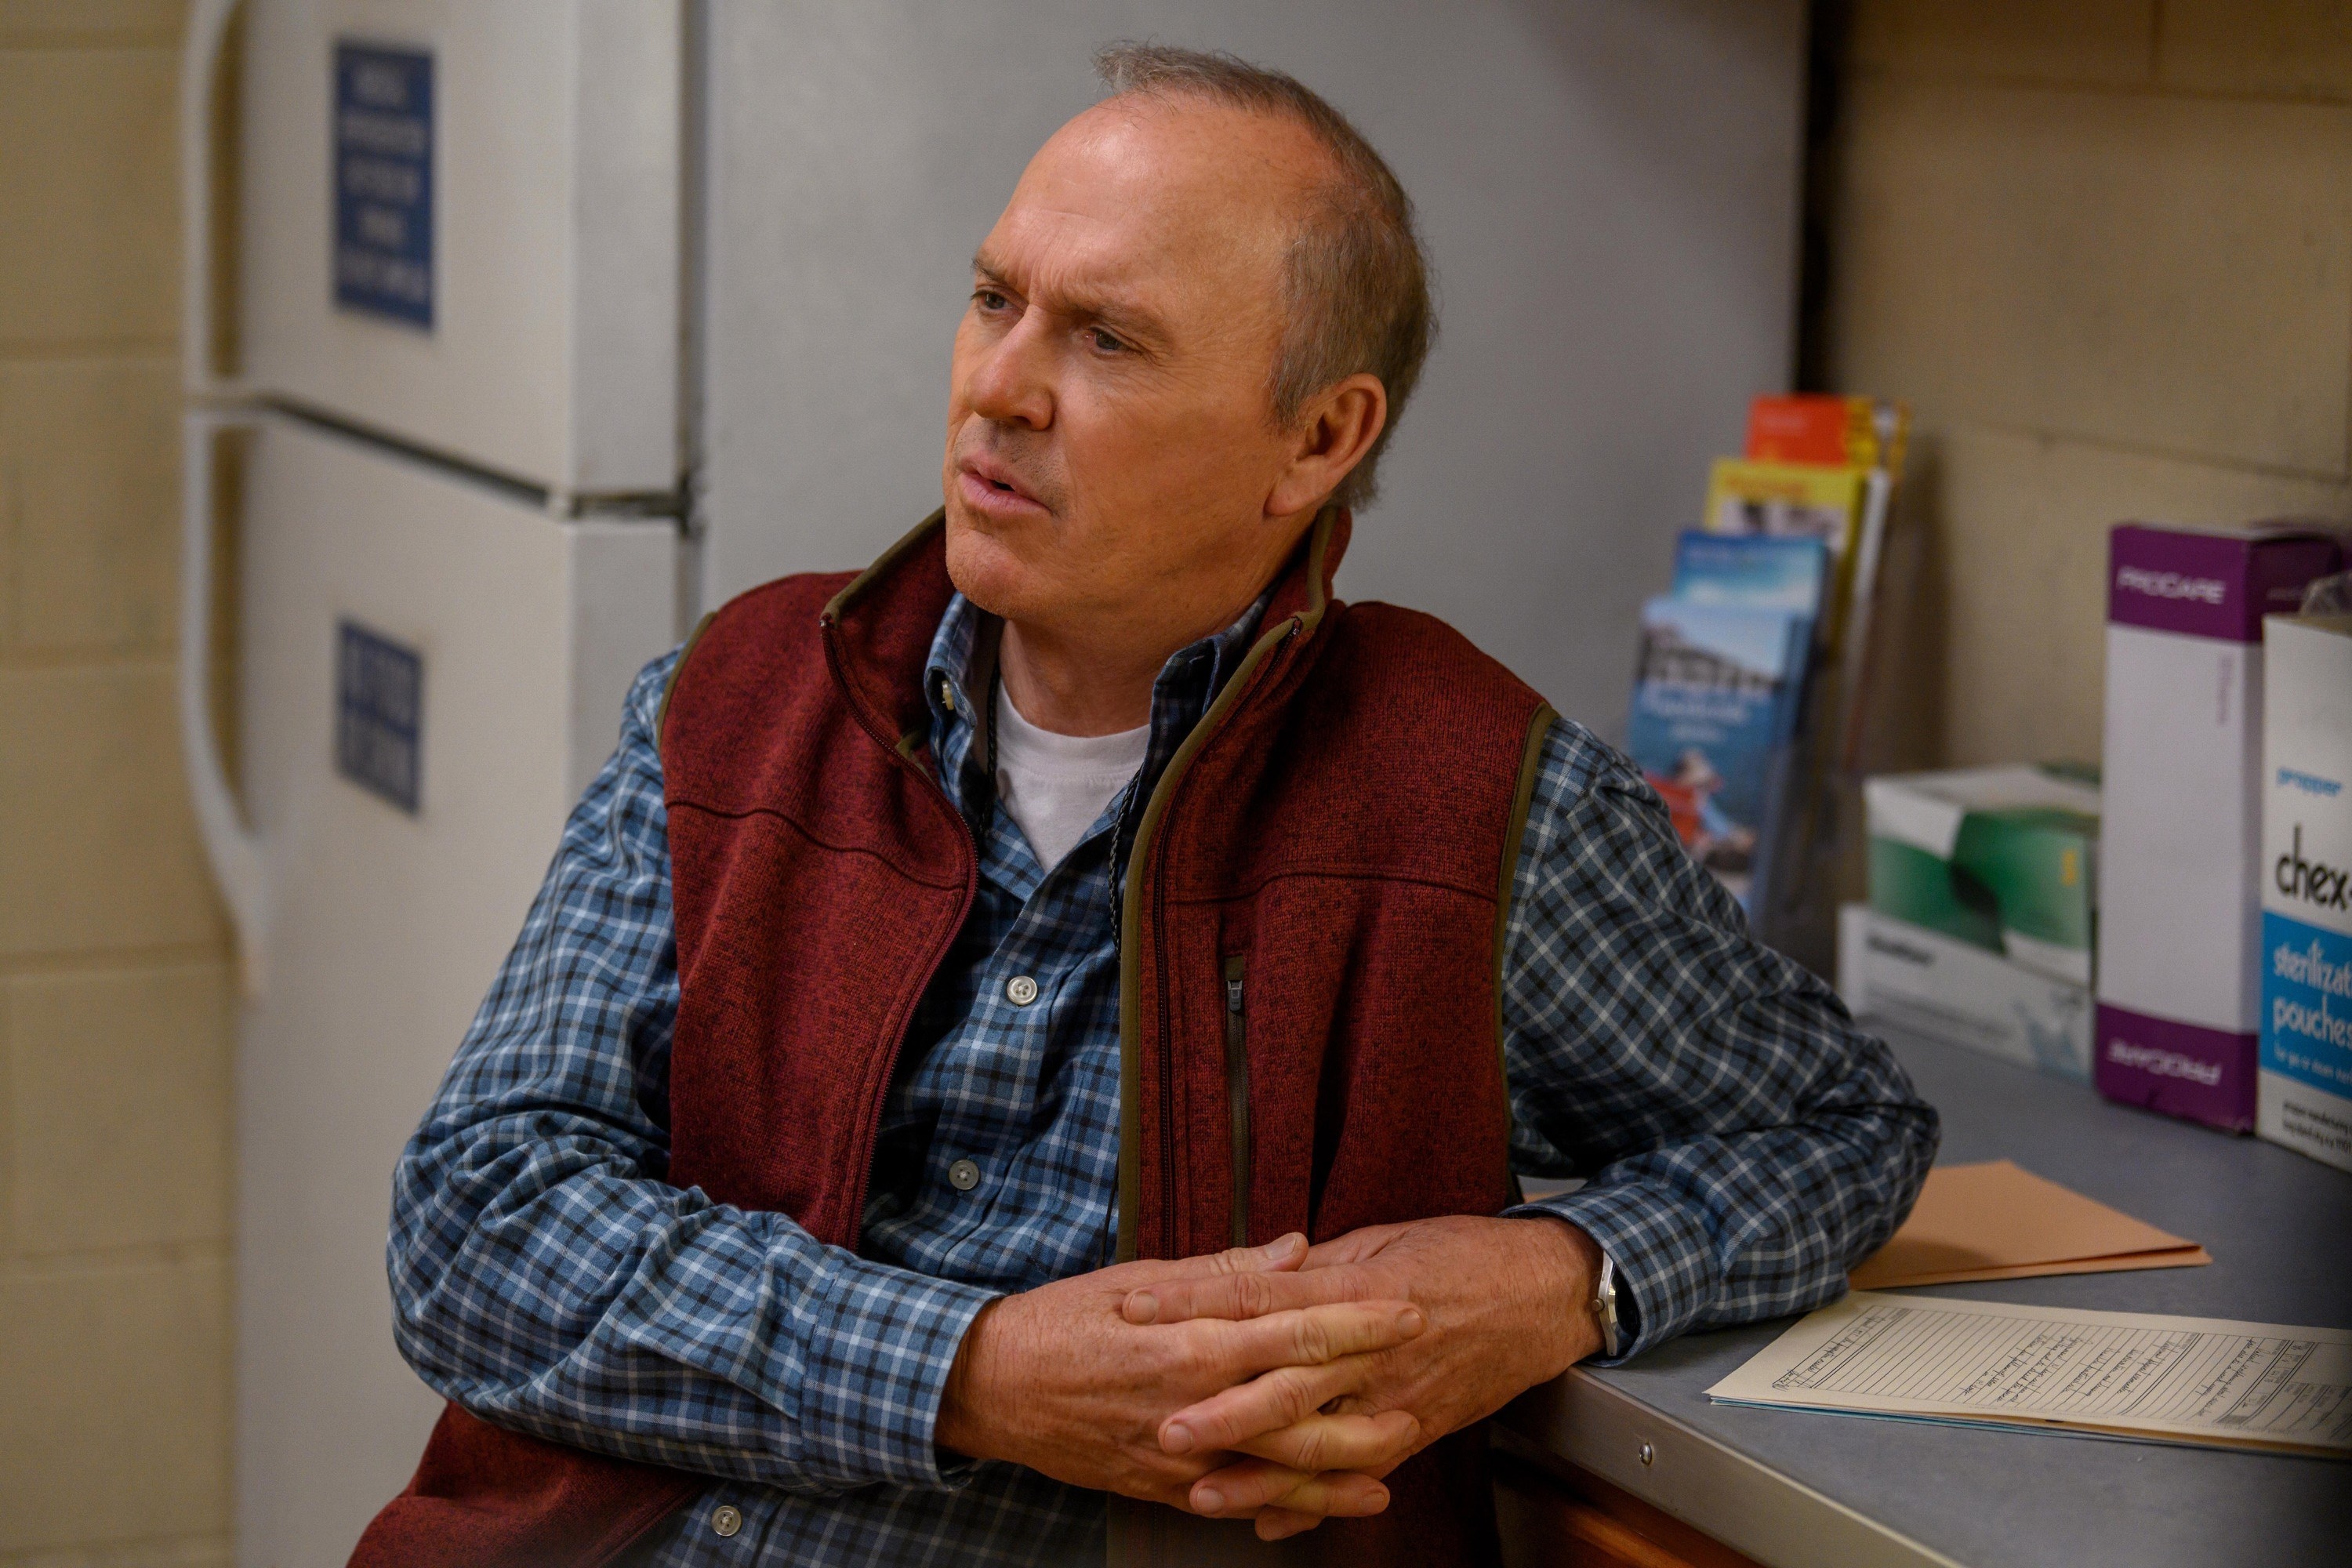 Michael Keaton leans on a counter